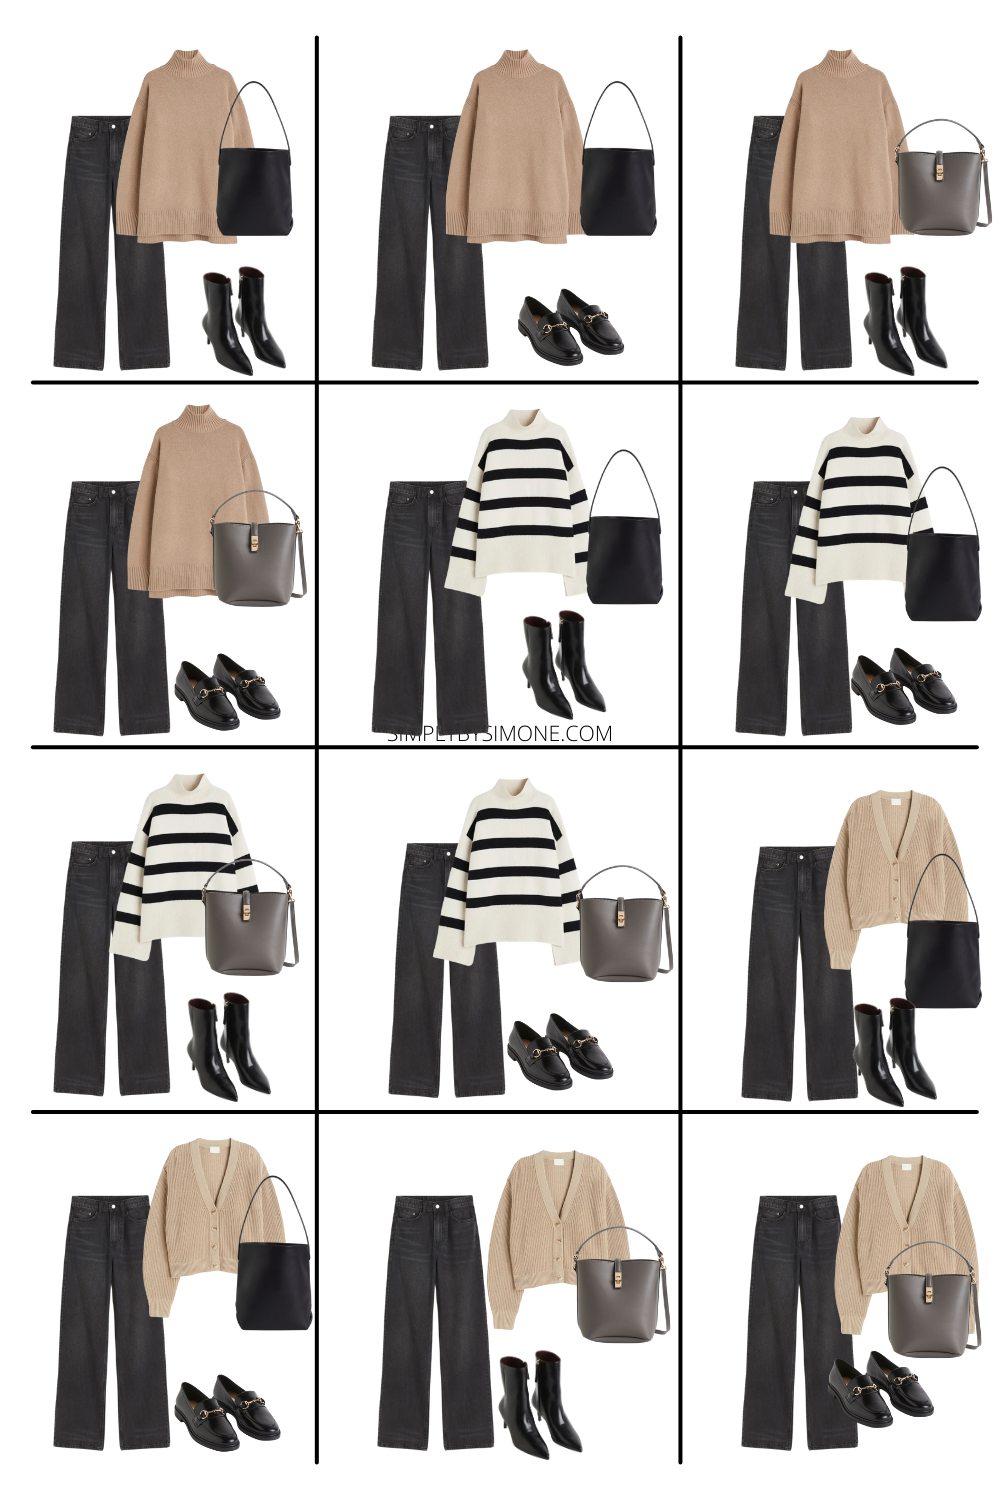 Affordable H&M Fall Capsule Wardrobe | 15 Pieces, 48 Outfits | How to Build a Capsule Wardrobe | H&M Fall Clothes | Outfit Inspiration | 48 Fall Weather Outfit Ideas | Fall Vacation Packing Guide | H&M Fall Capsule Wardrobe - What To Wear This Fall 2023, Parisian Outfit Ideas | Looks 1-12 | Simply by Simone